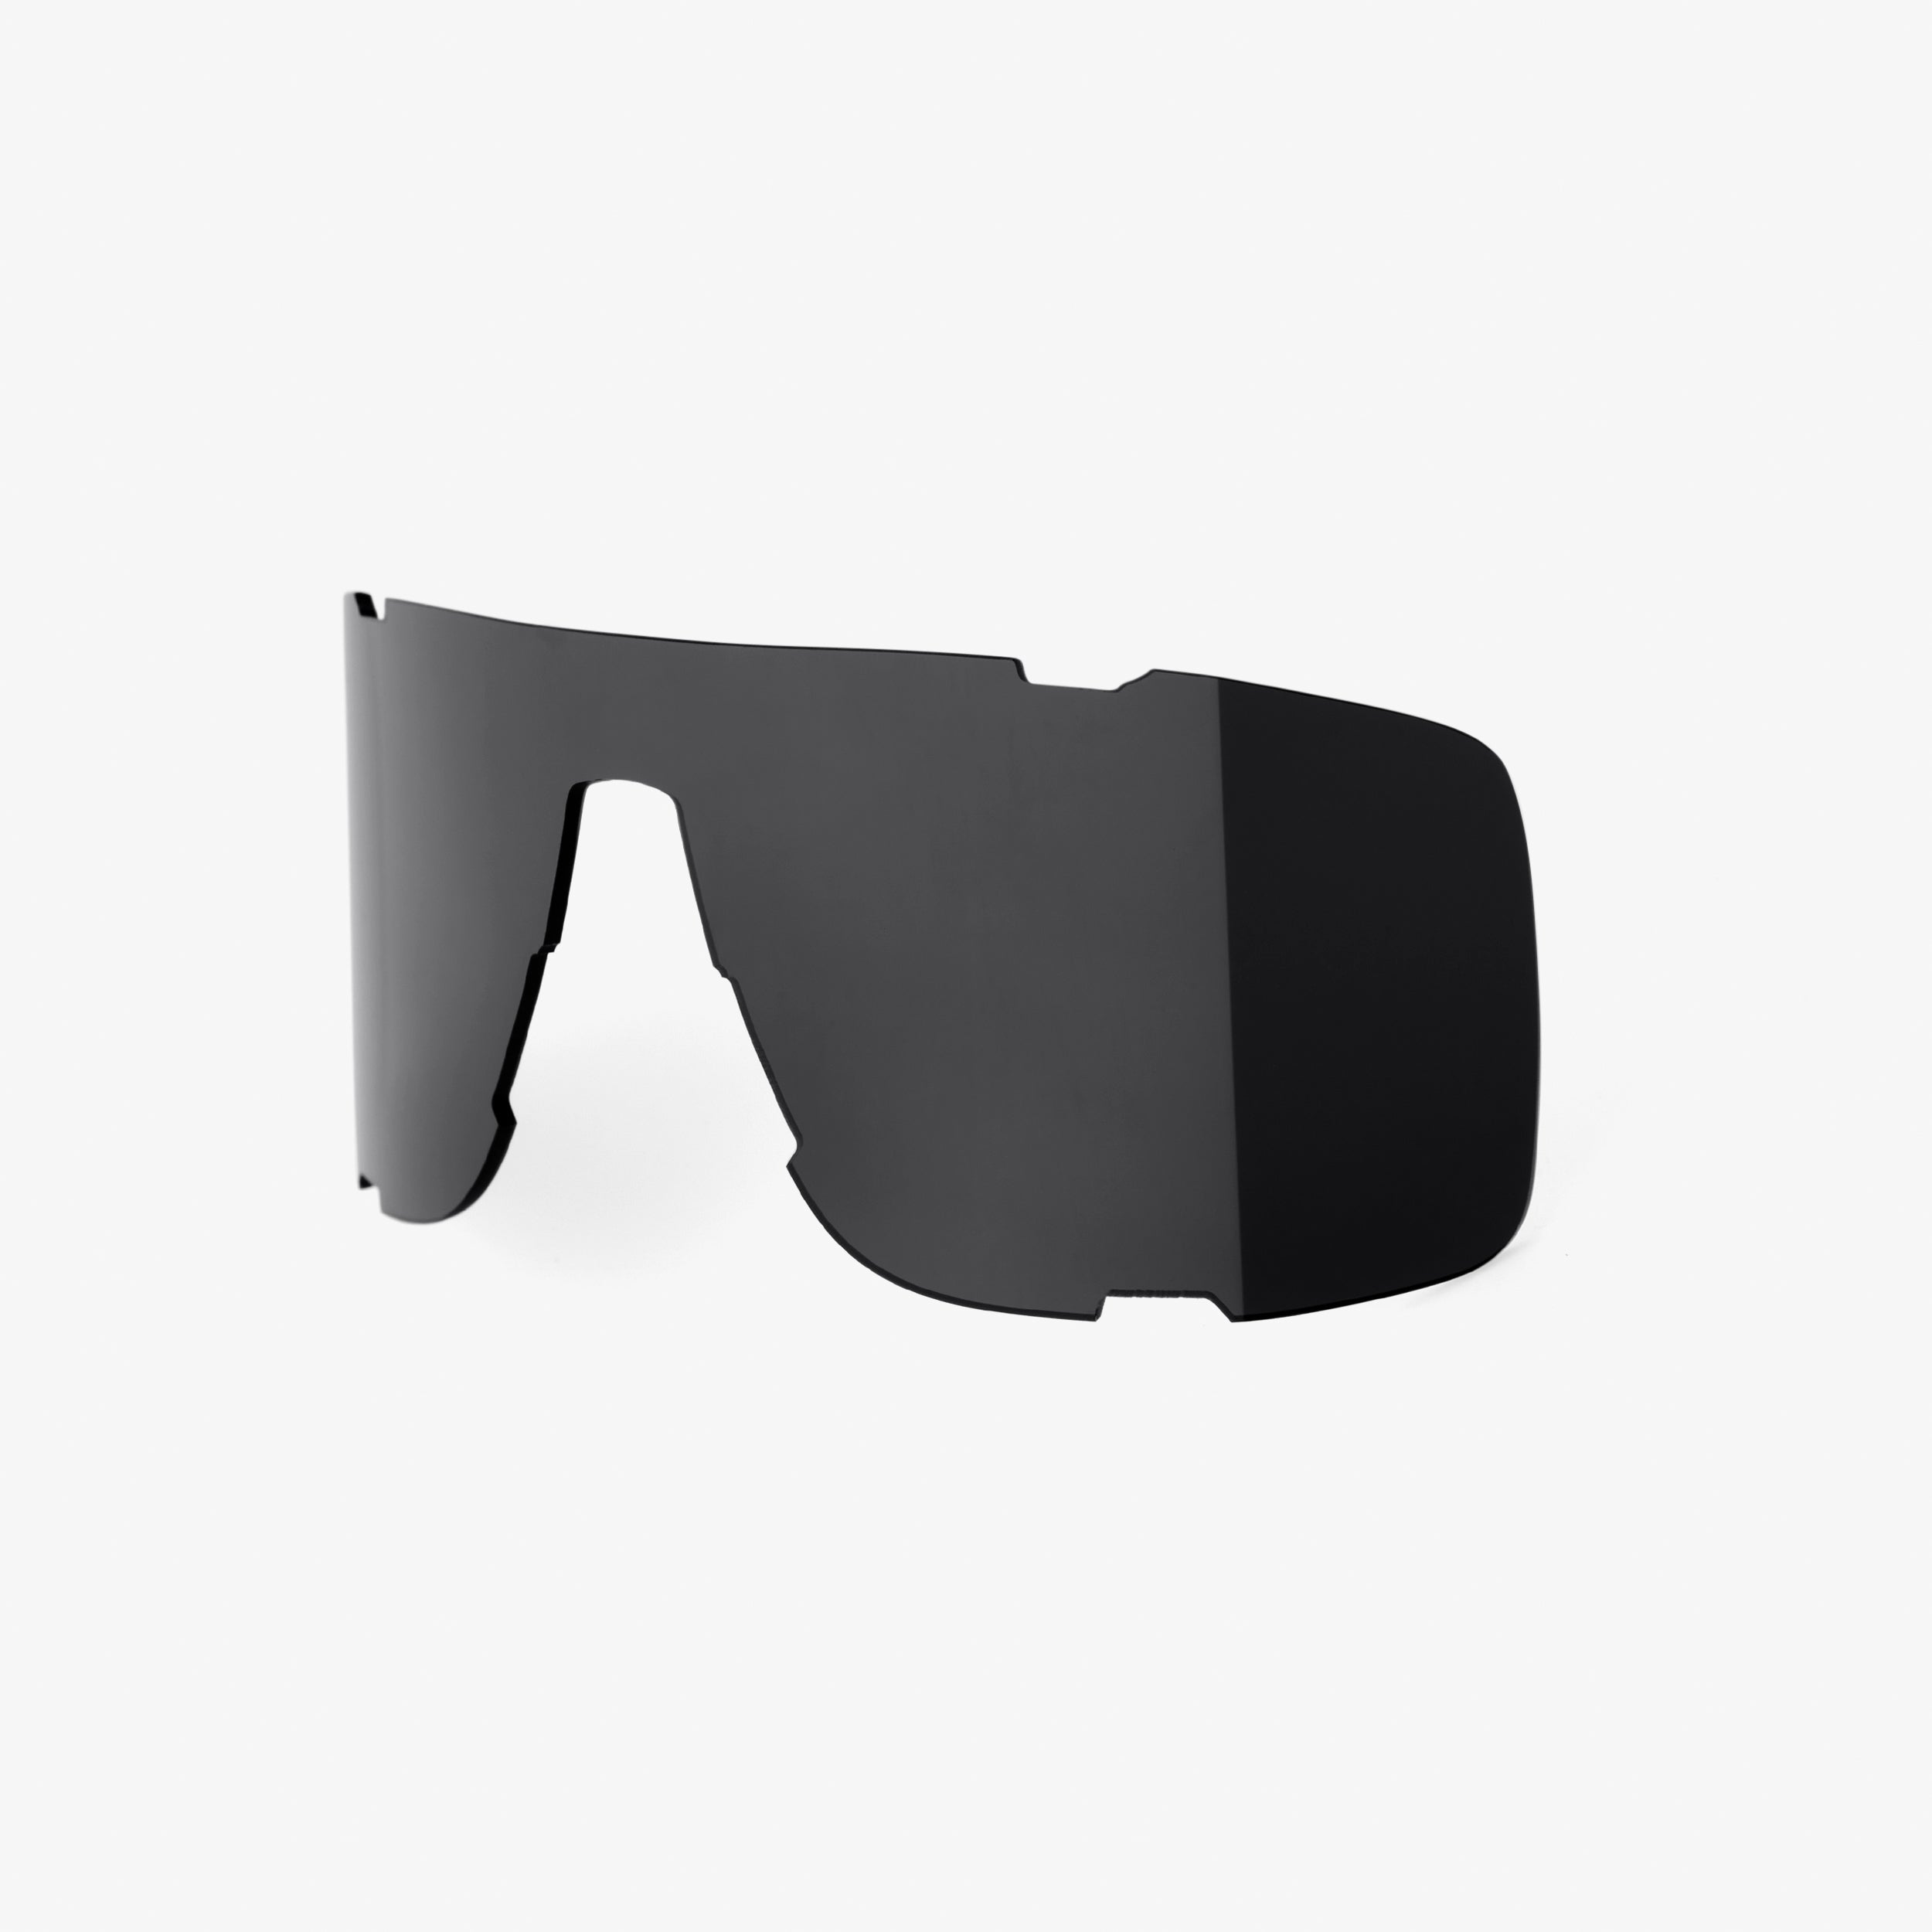 EASTCRAFT REPLACEMENT LENS SHIELD - Black Mirror